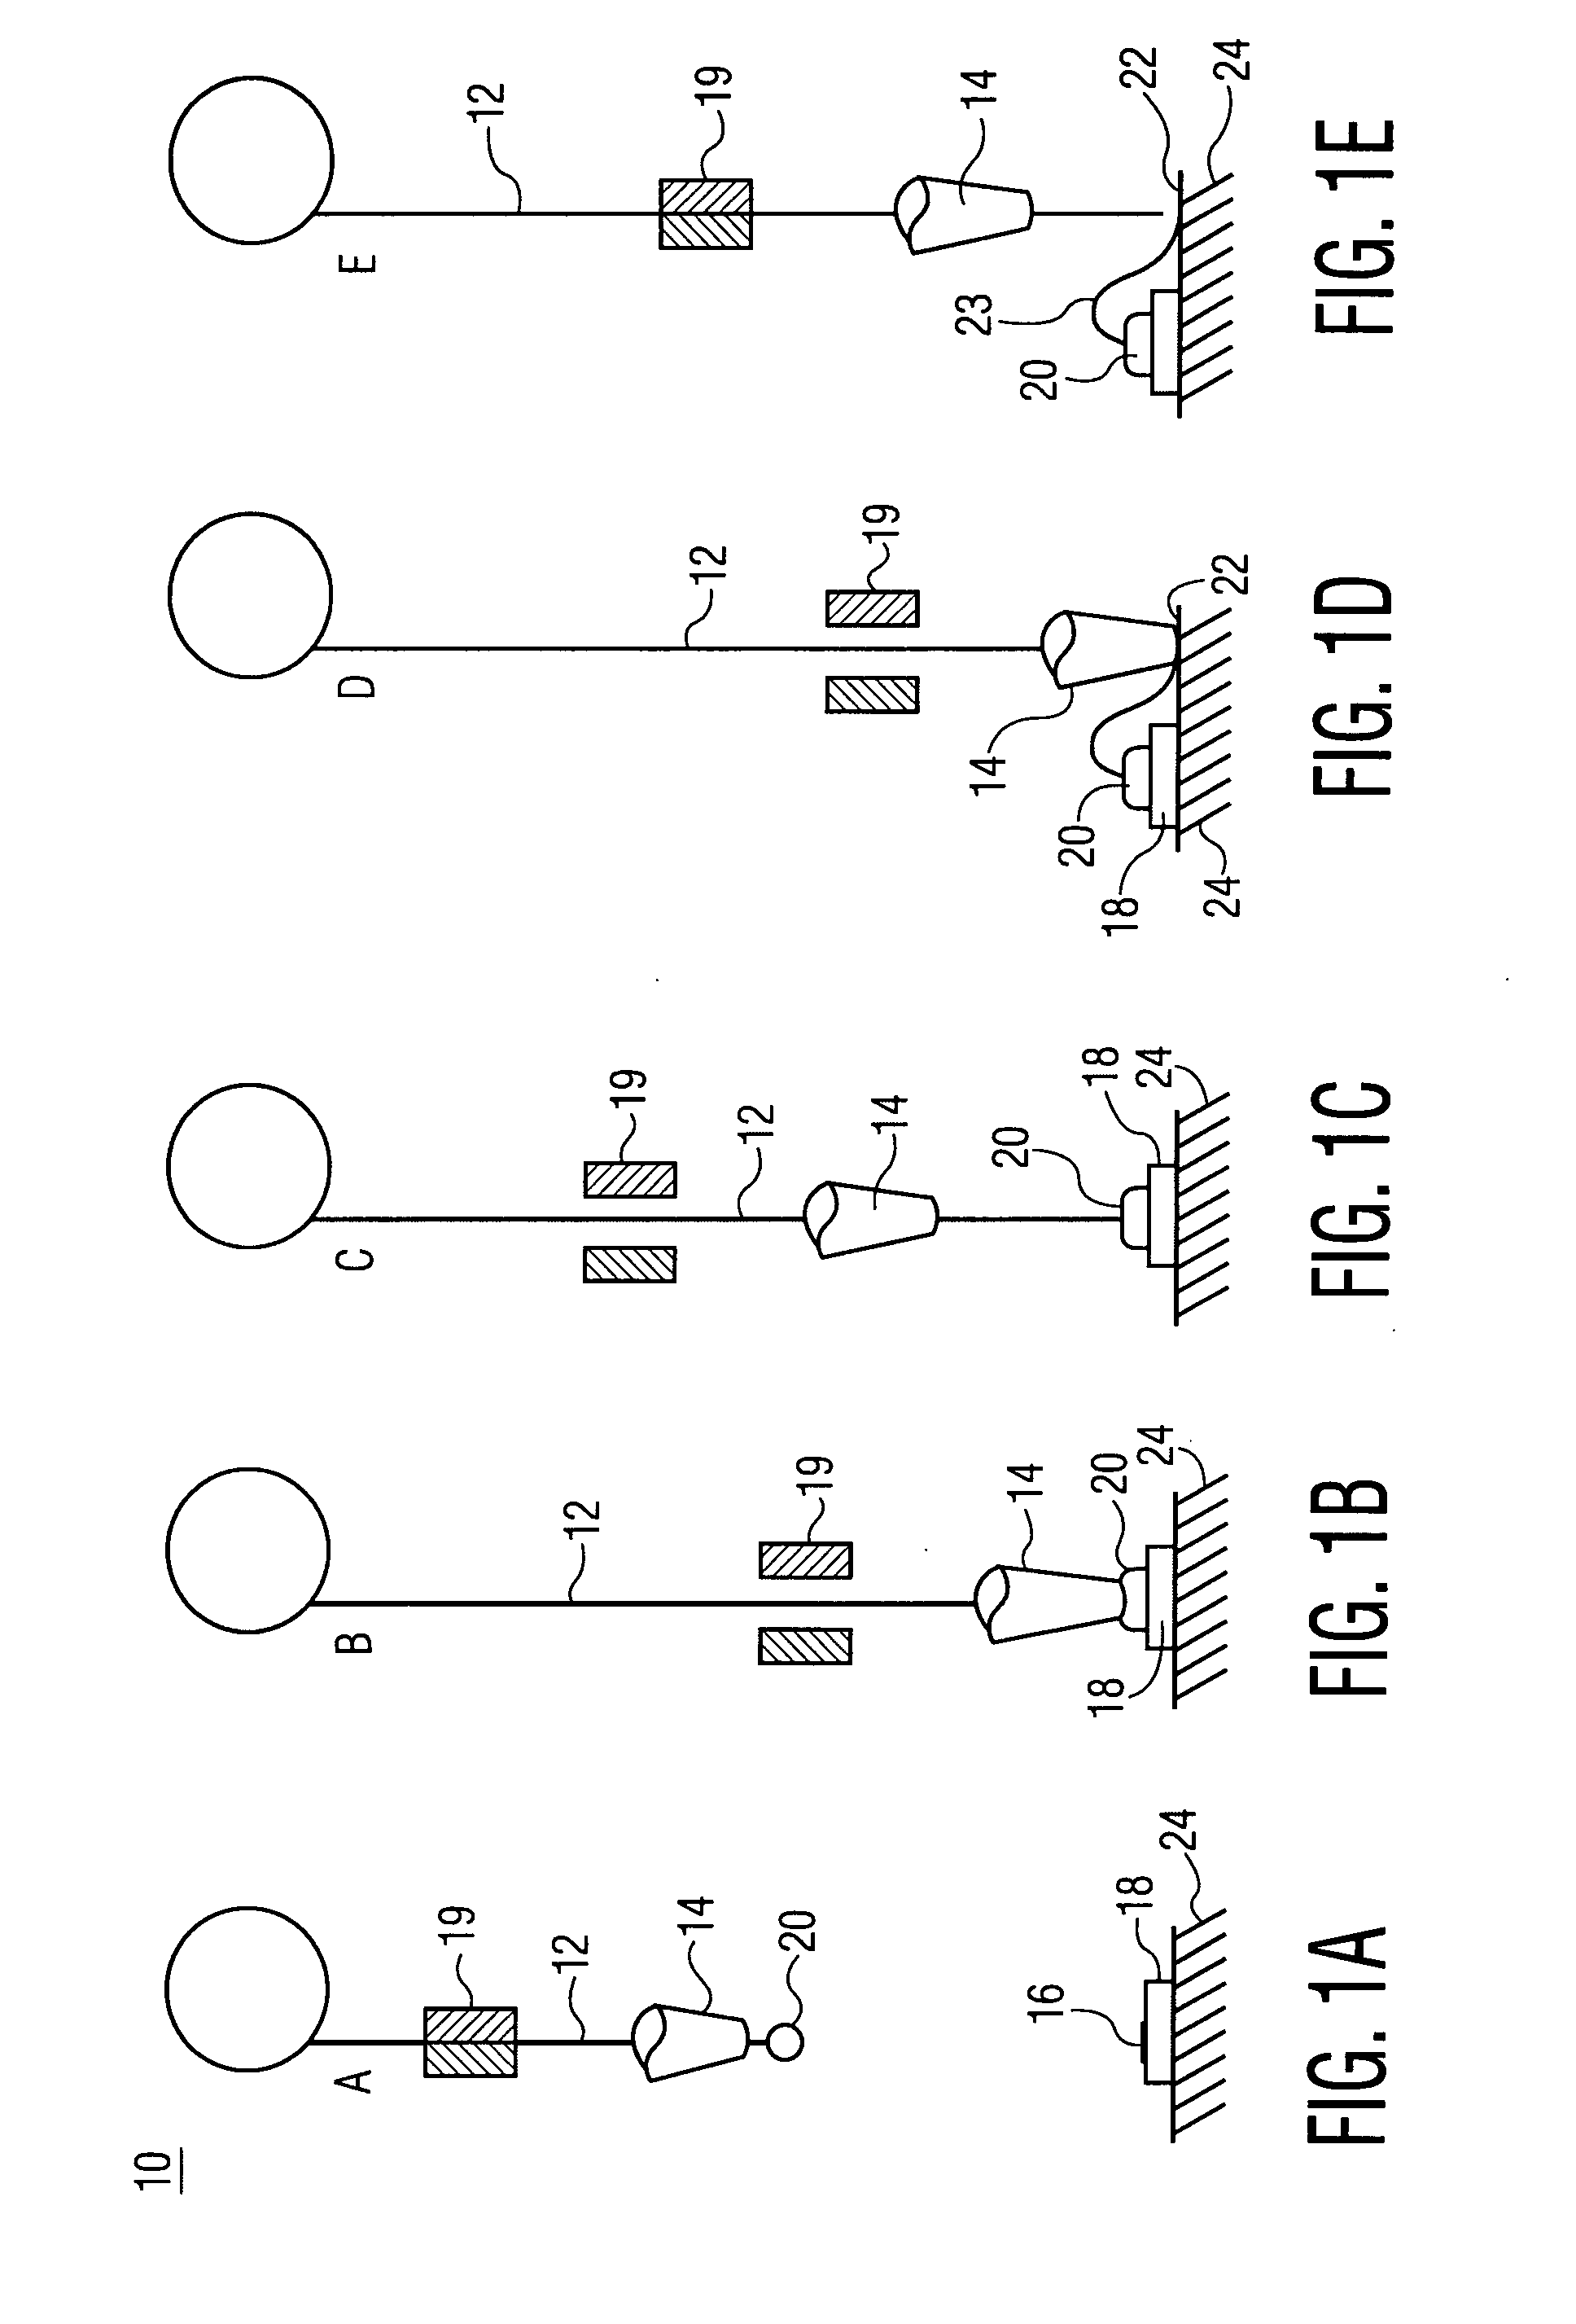 Method and apparatus for forming bumps for semiconductor interconnections using a wire bonding machine